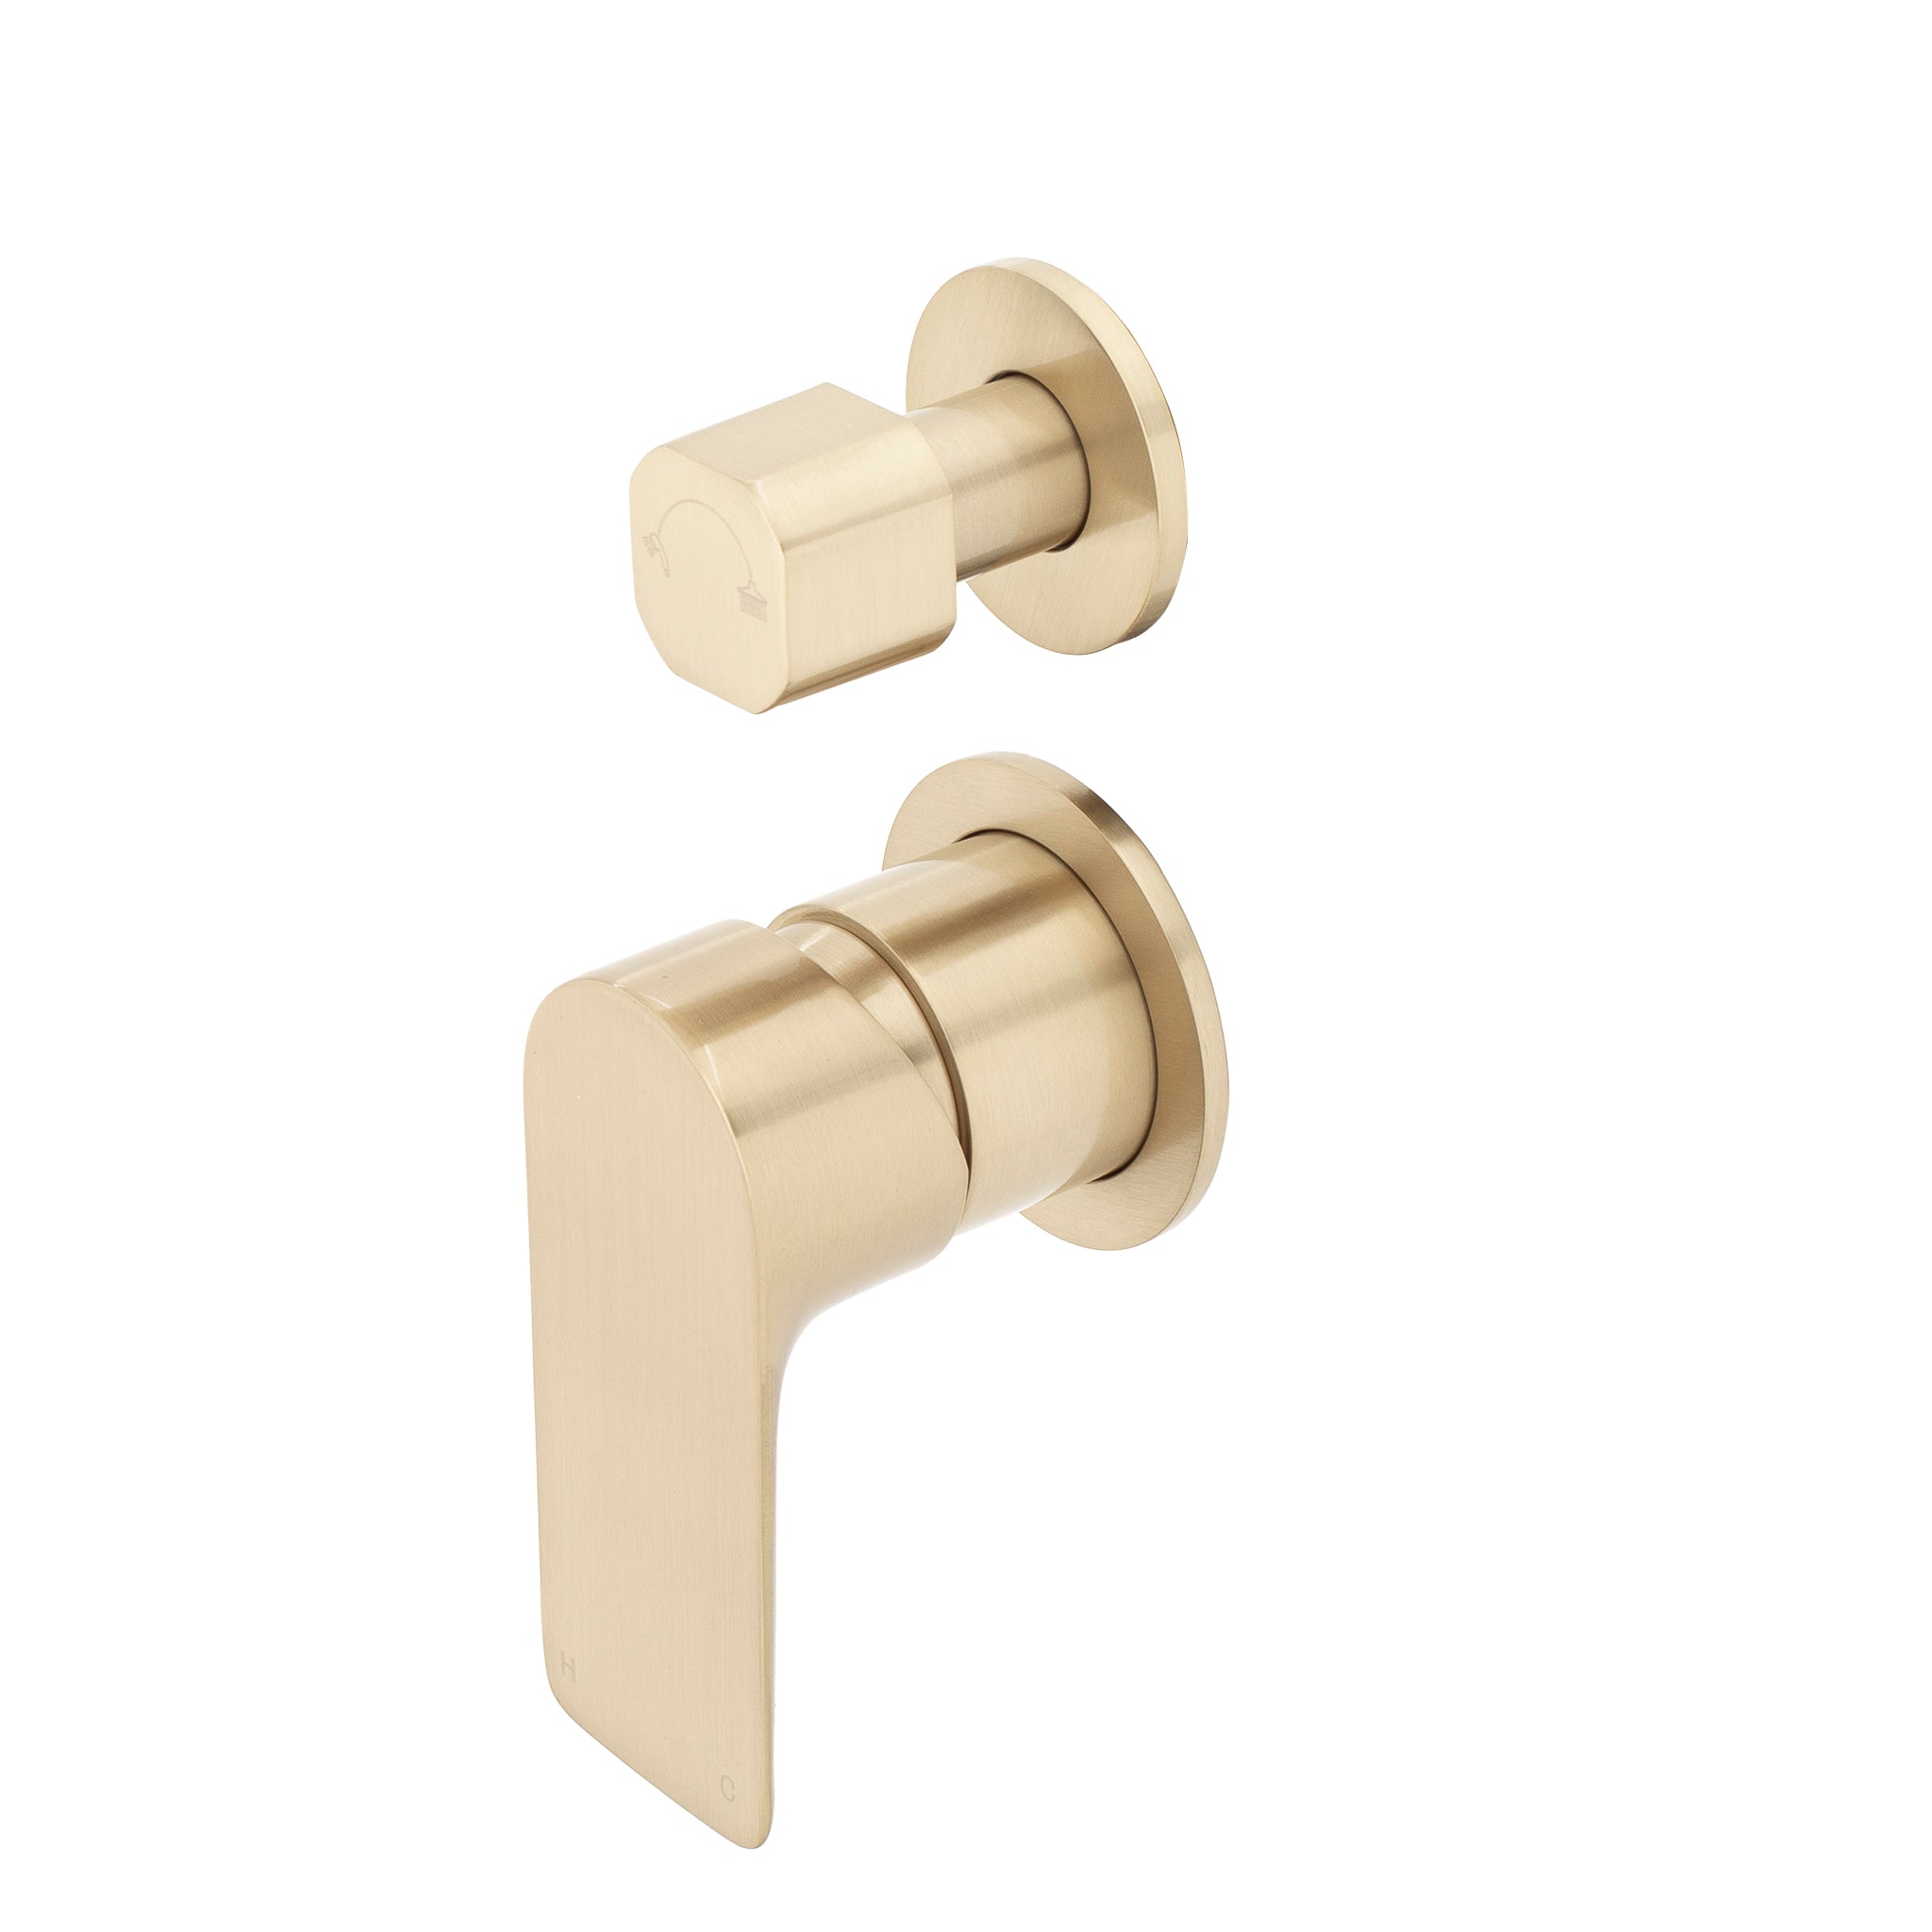 Jena Shower/ Bath Wall Mixer with Diverter and Round Plates, Brushed Brass (Gold)